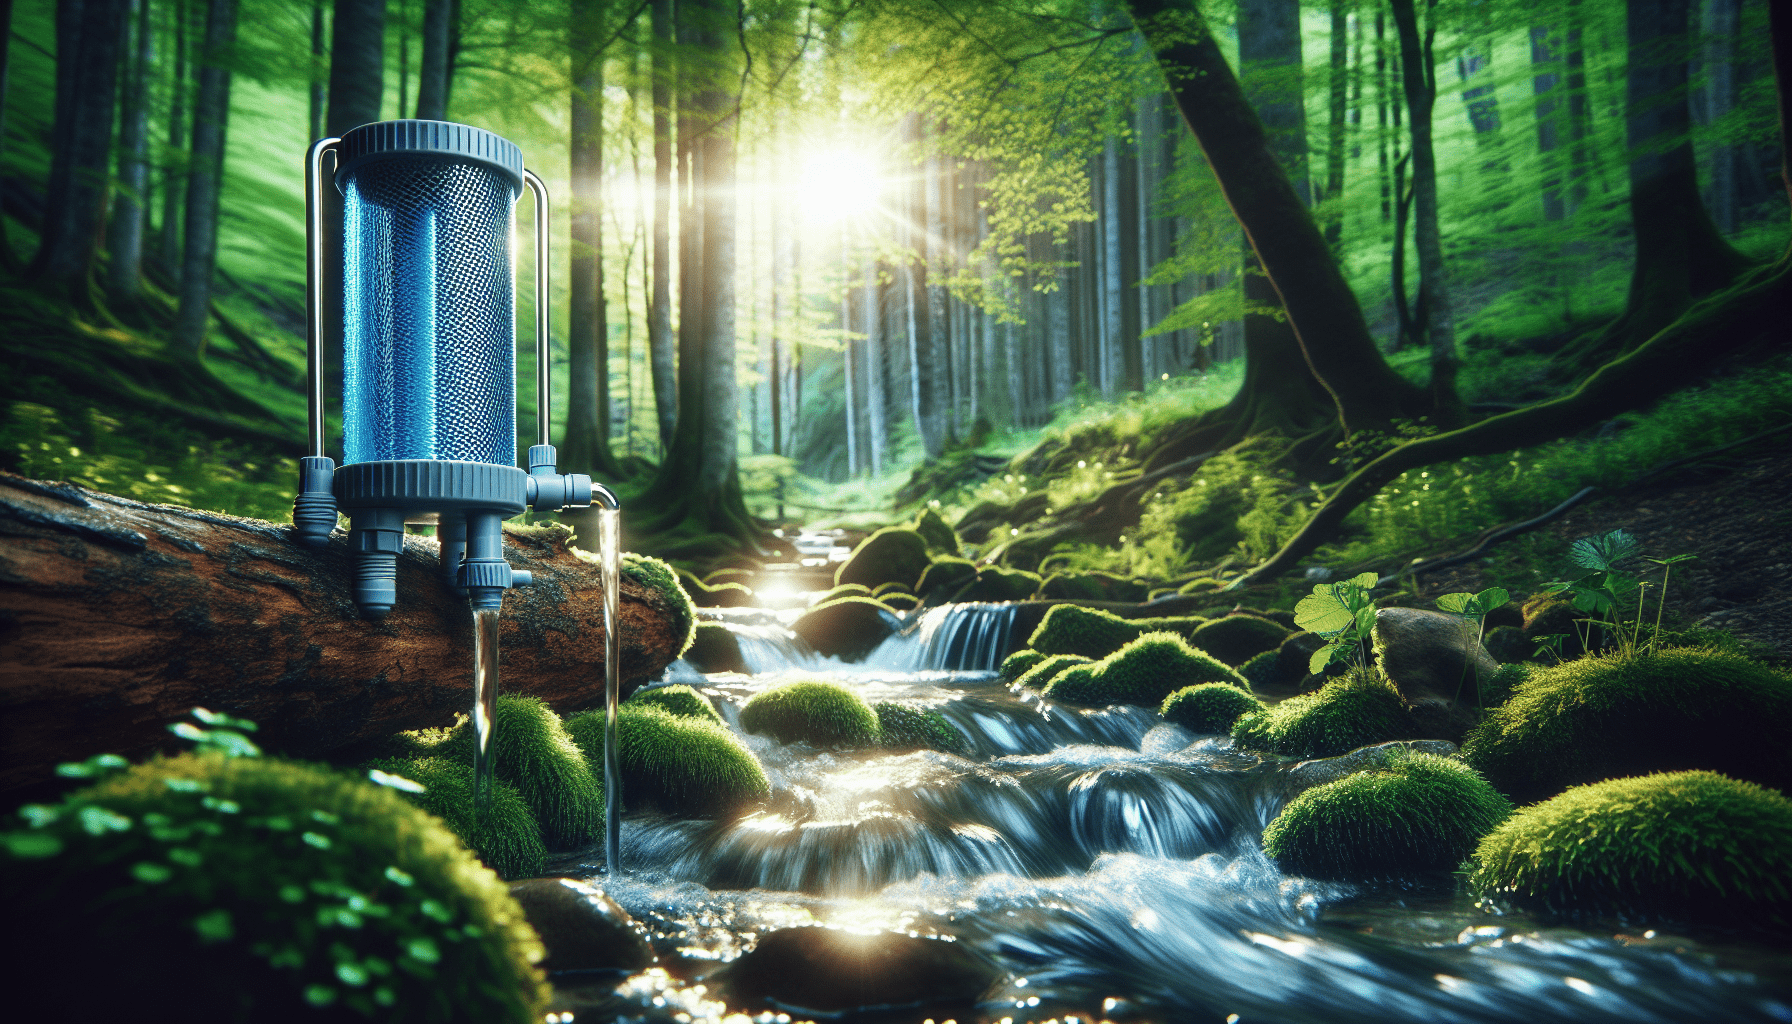 Expert Advice On Finding And Purifying Water In The Outdoors